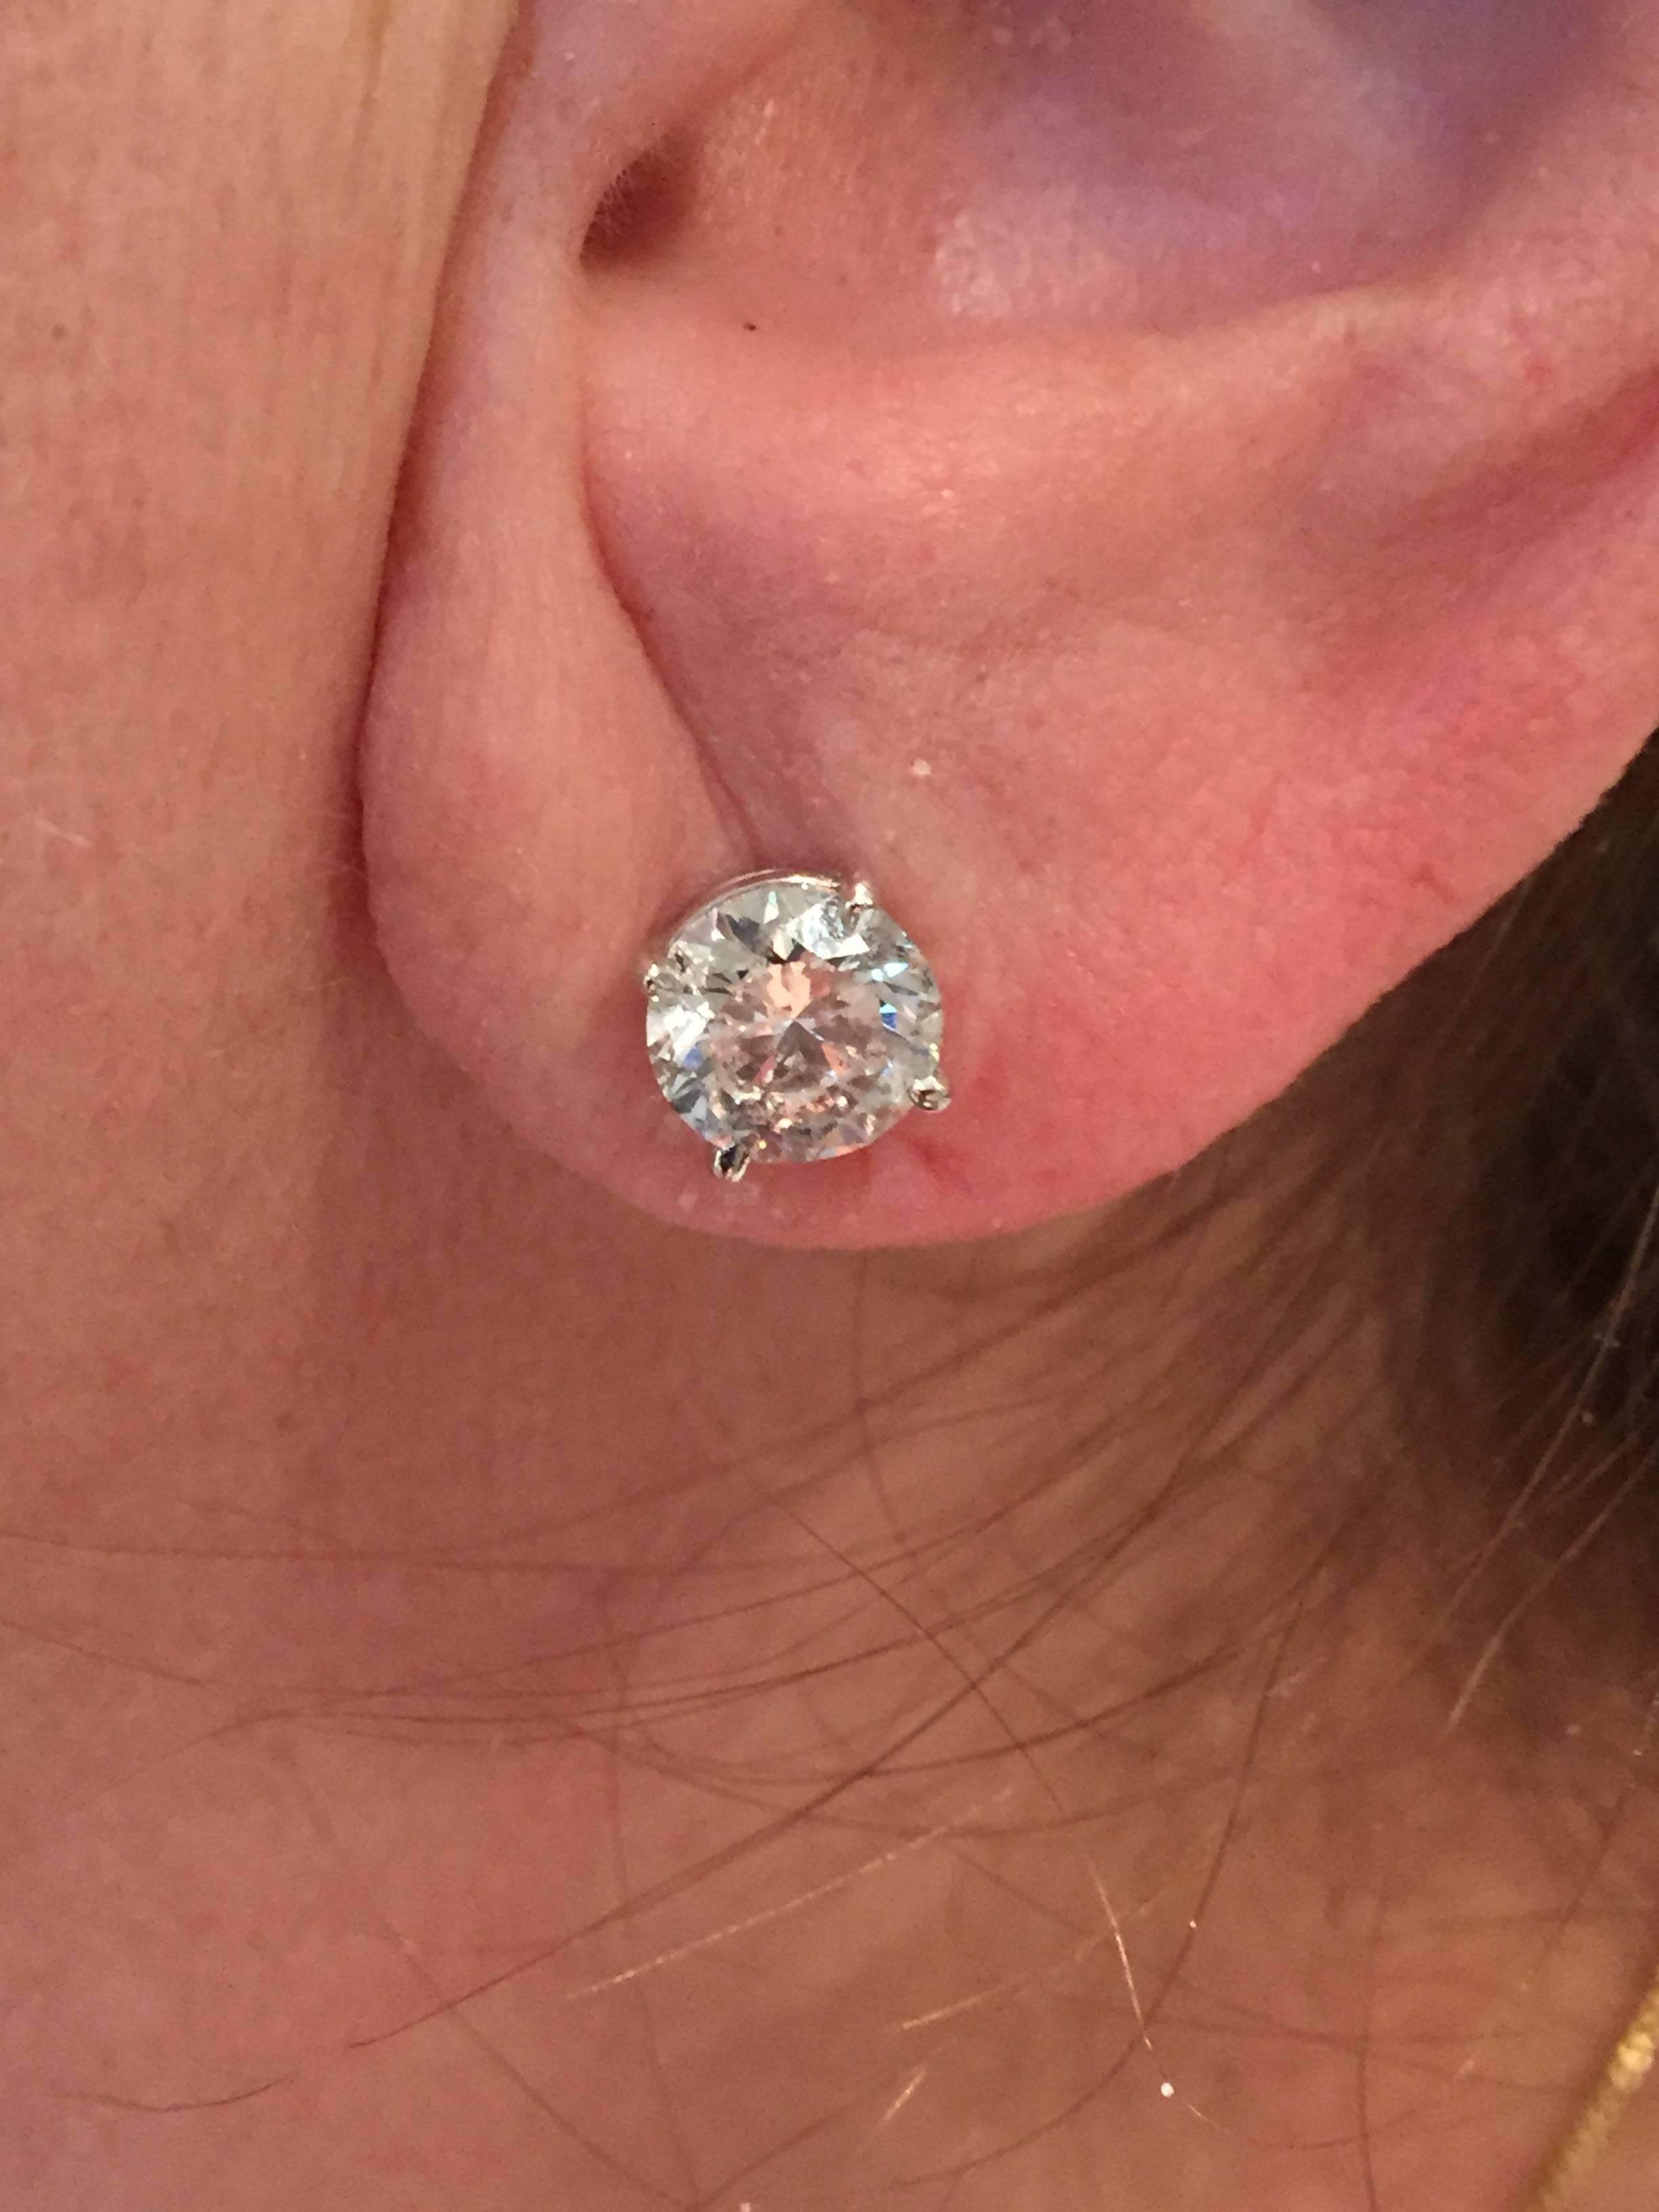 Two round diamonds weighing a total of weight of 3.41 carats mounted in classic four prong, white gold fourteen karat pushback earrings.  The two diamonds have a total weight of 3.41 carats.  The diamonds have grading reports from the European